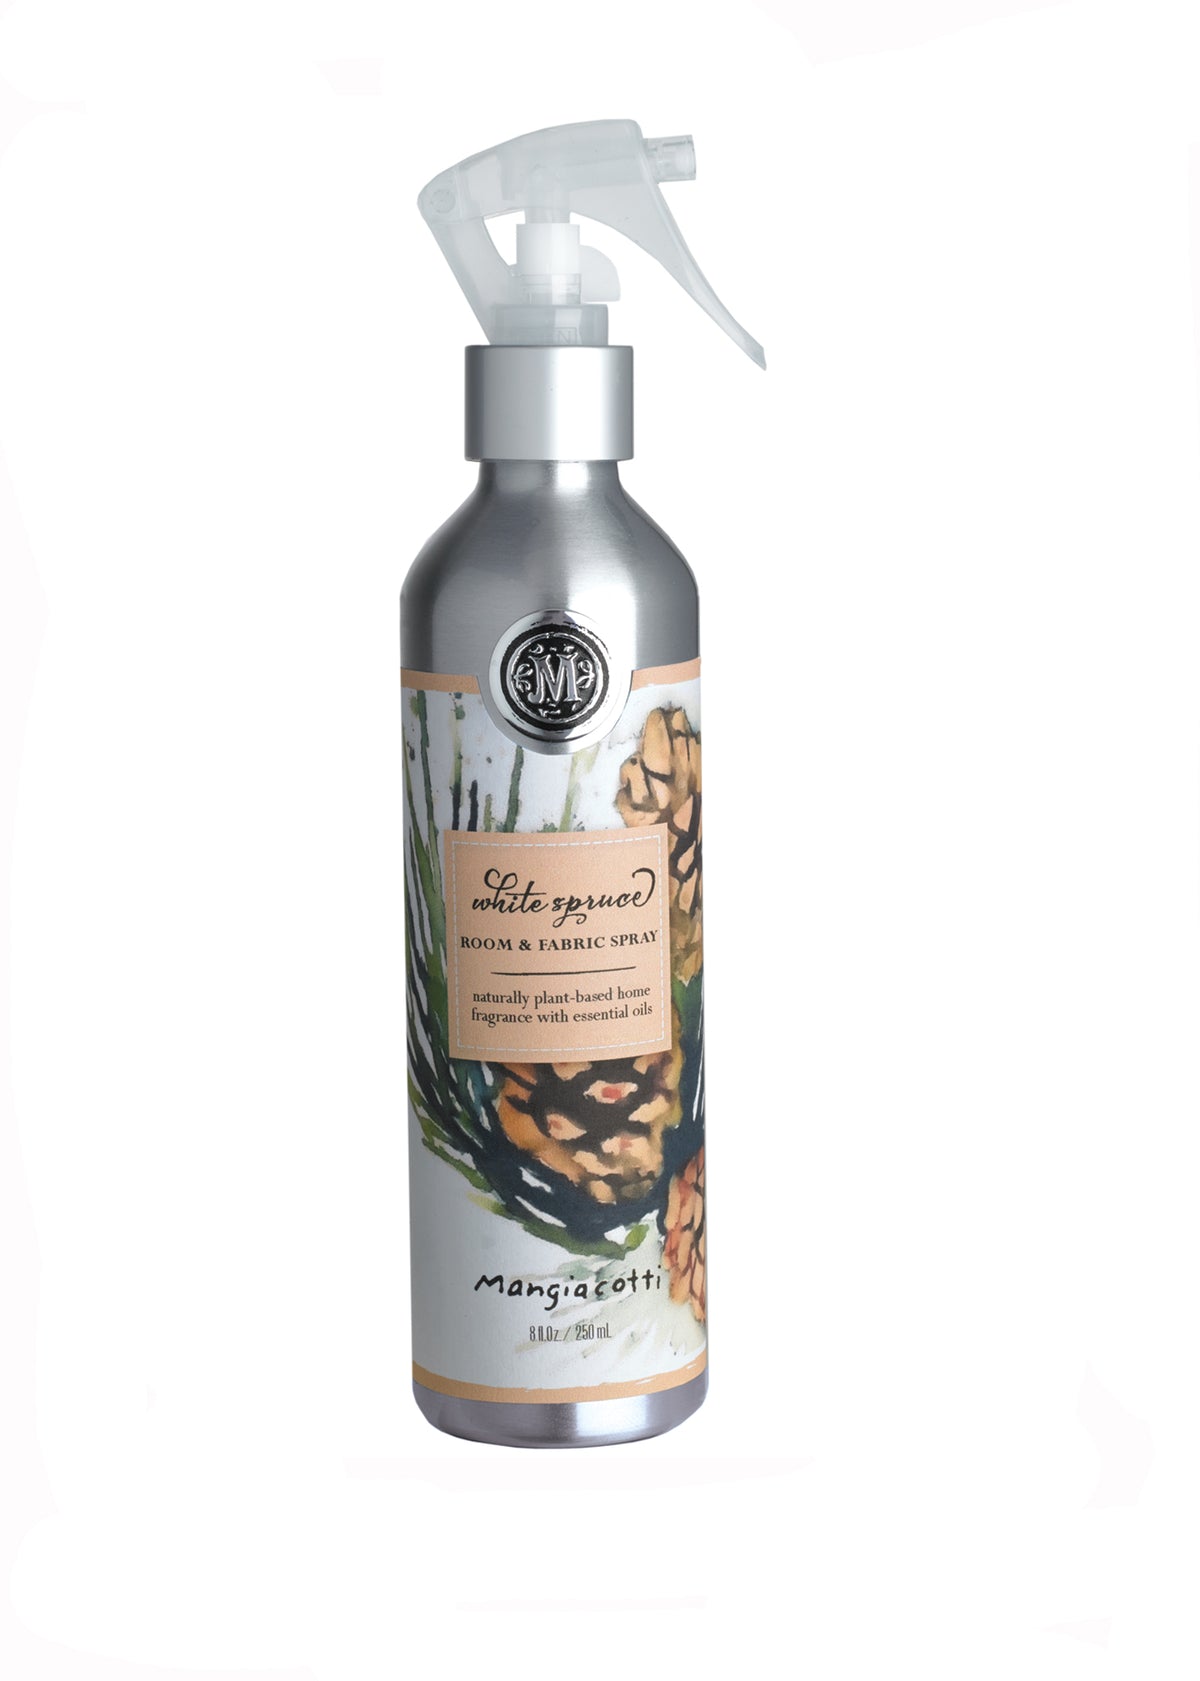 Aluminum spray bottle of Mangiacotti White Spruce Room & Fabric Spray with a label featuring painted lemons and greenery, accompanied by a gray and white logo at the top, infused with essential oils.